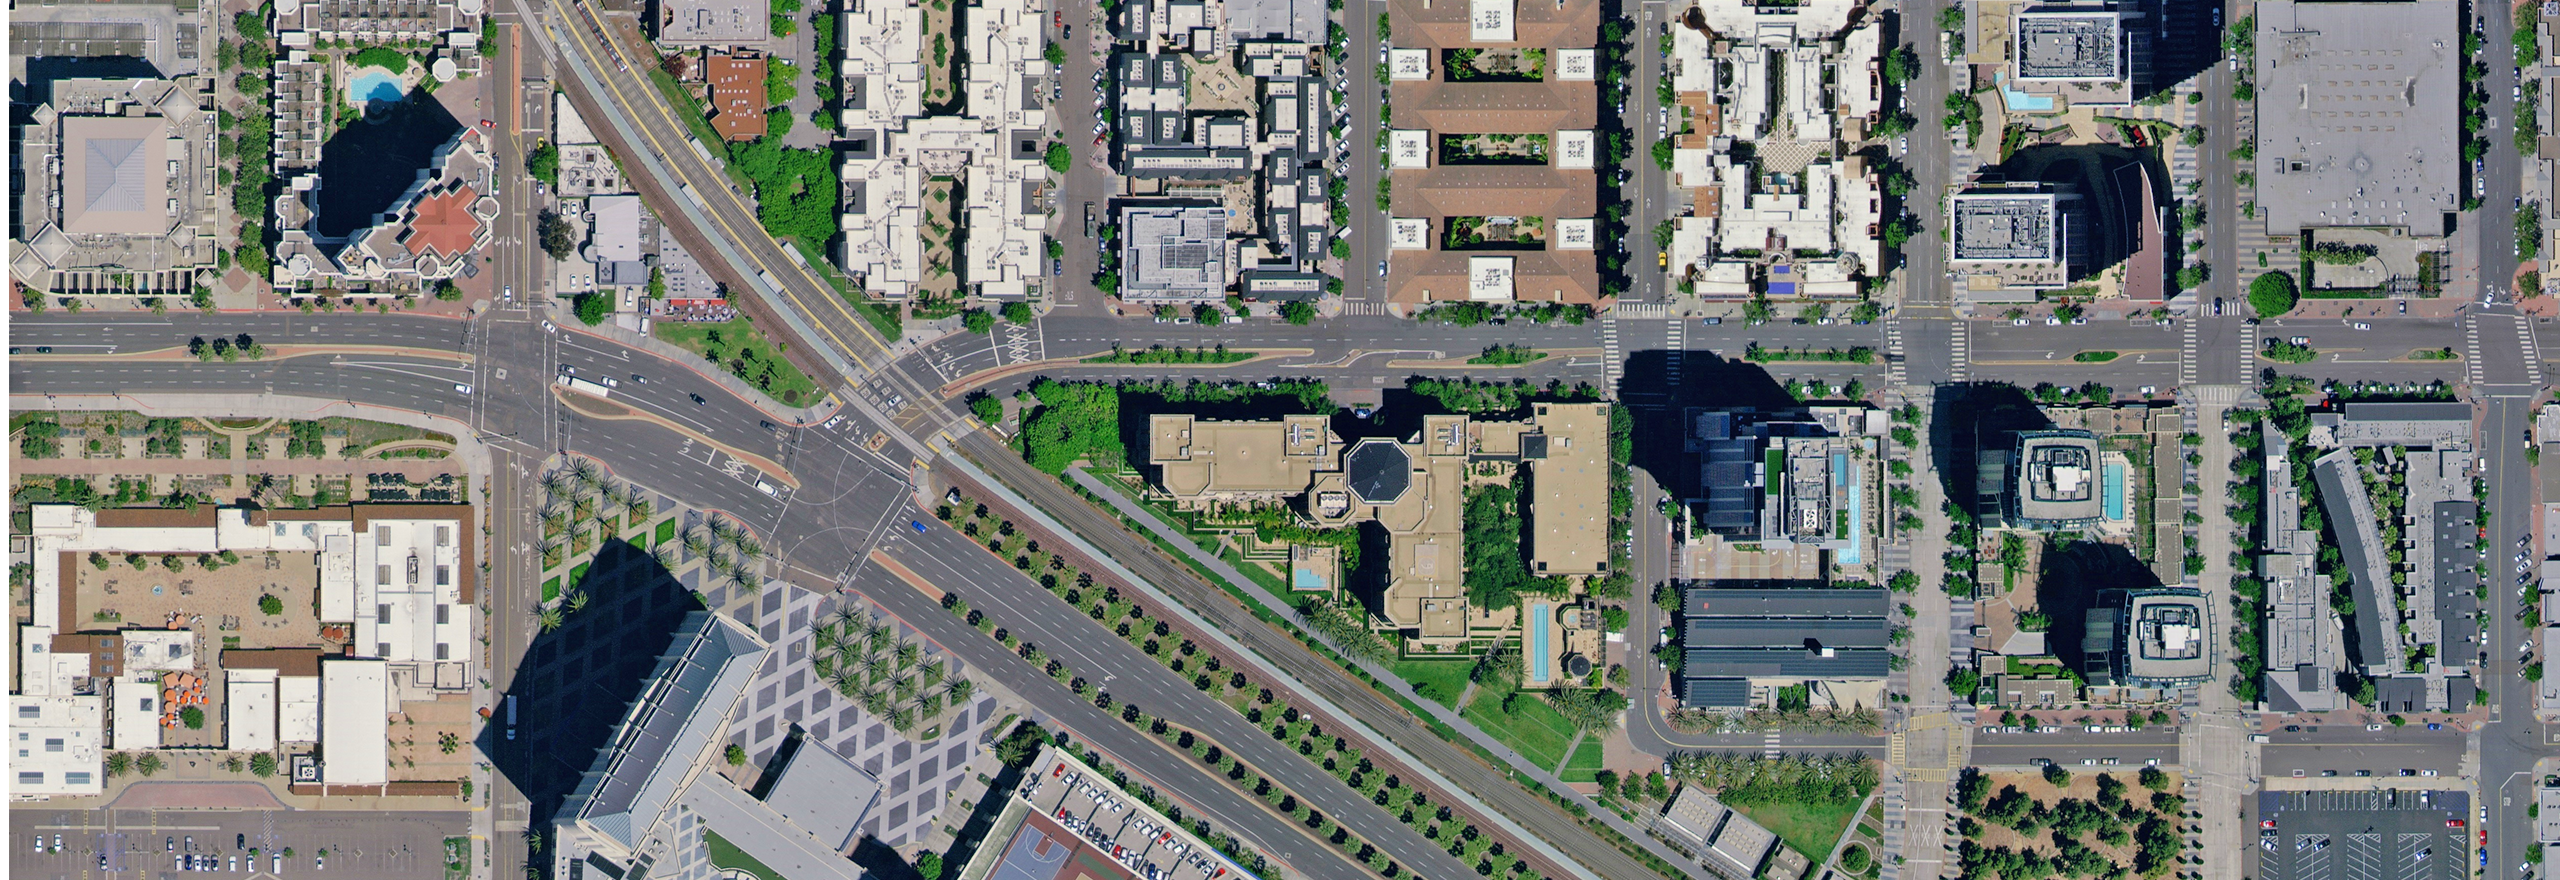 Aerial imagery of city blocks in San Diego